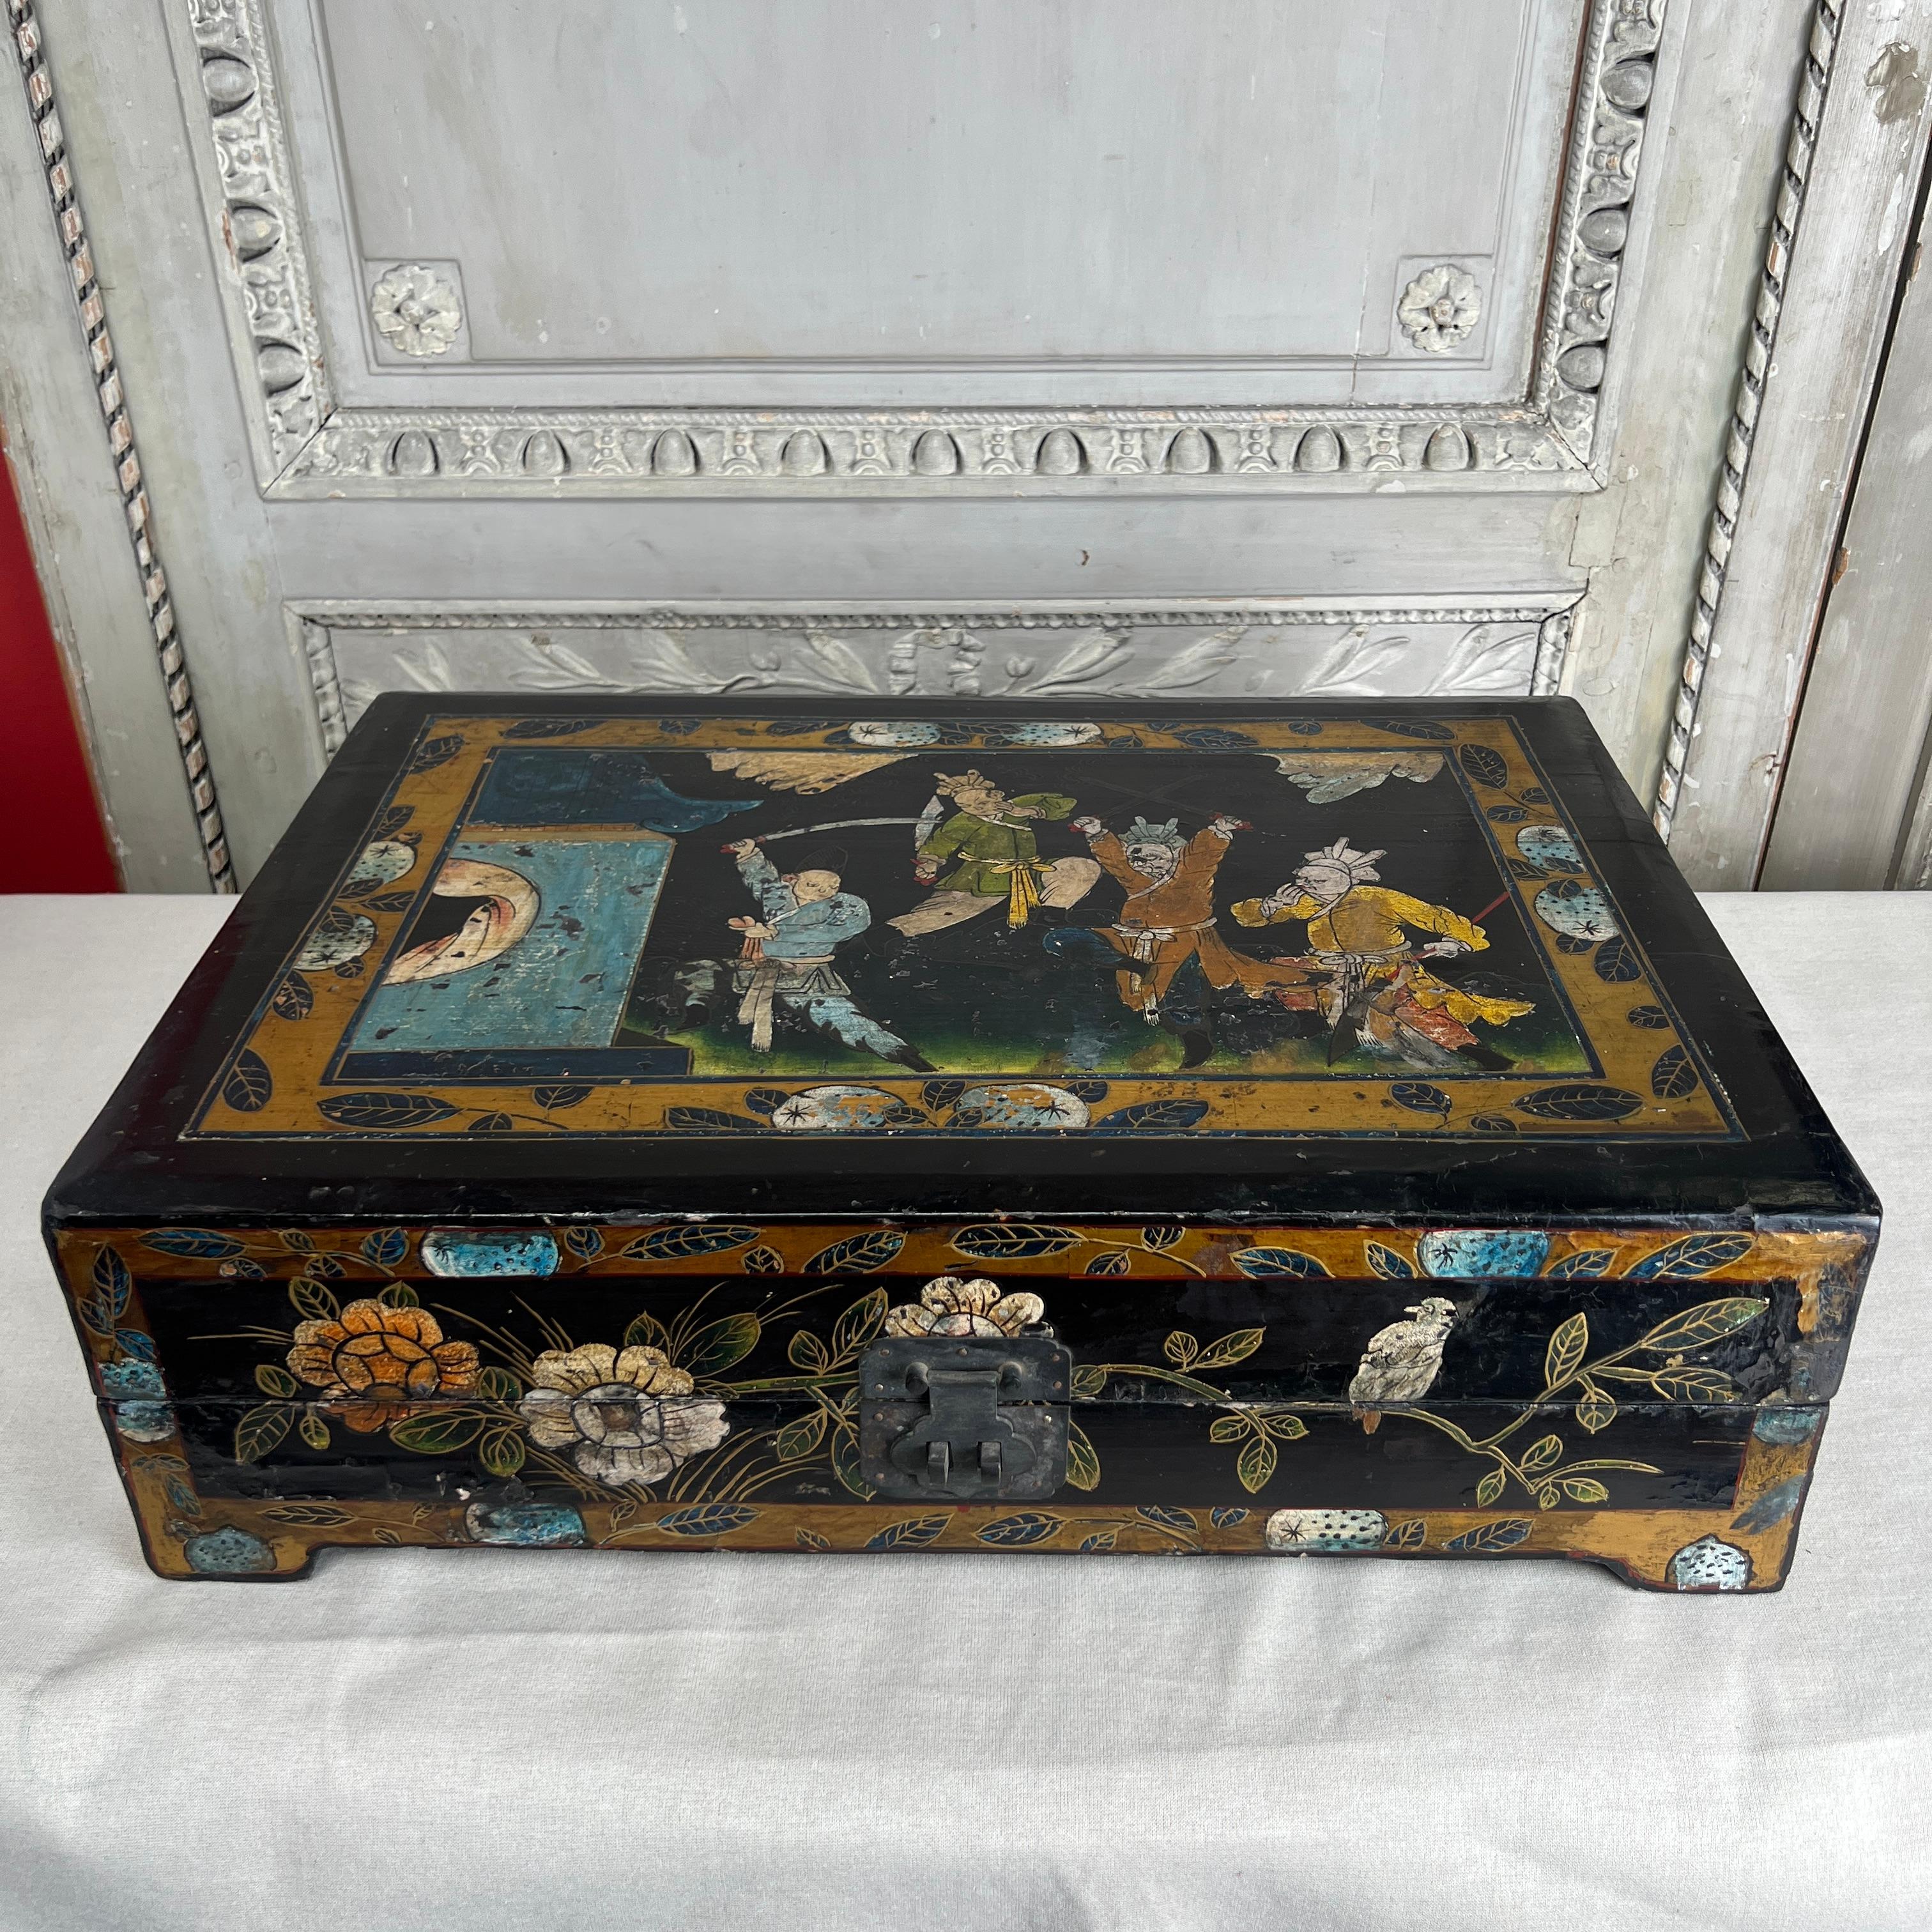 A large early 20th century Chinese lacquered box with gilt and polychrome decoration having warriors and flowers. 
This highly decorative box is large and easily used, it would be ideal to use for remote controls on a coffee table.